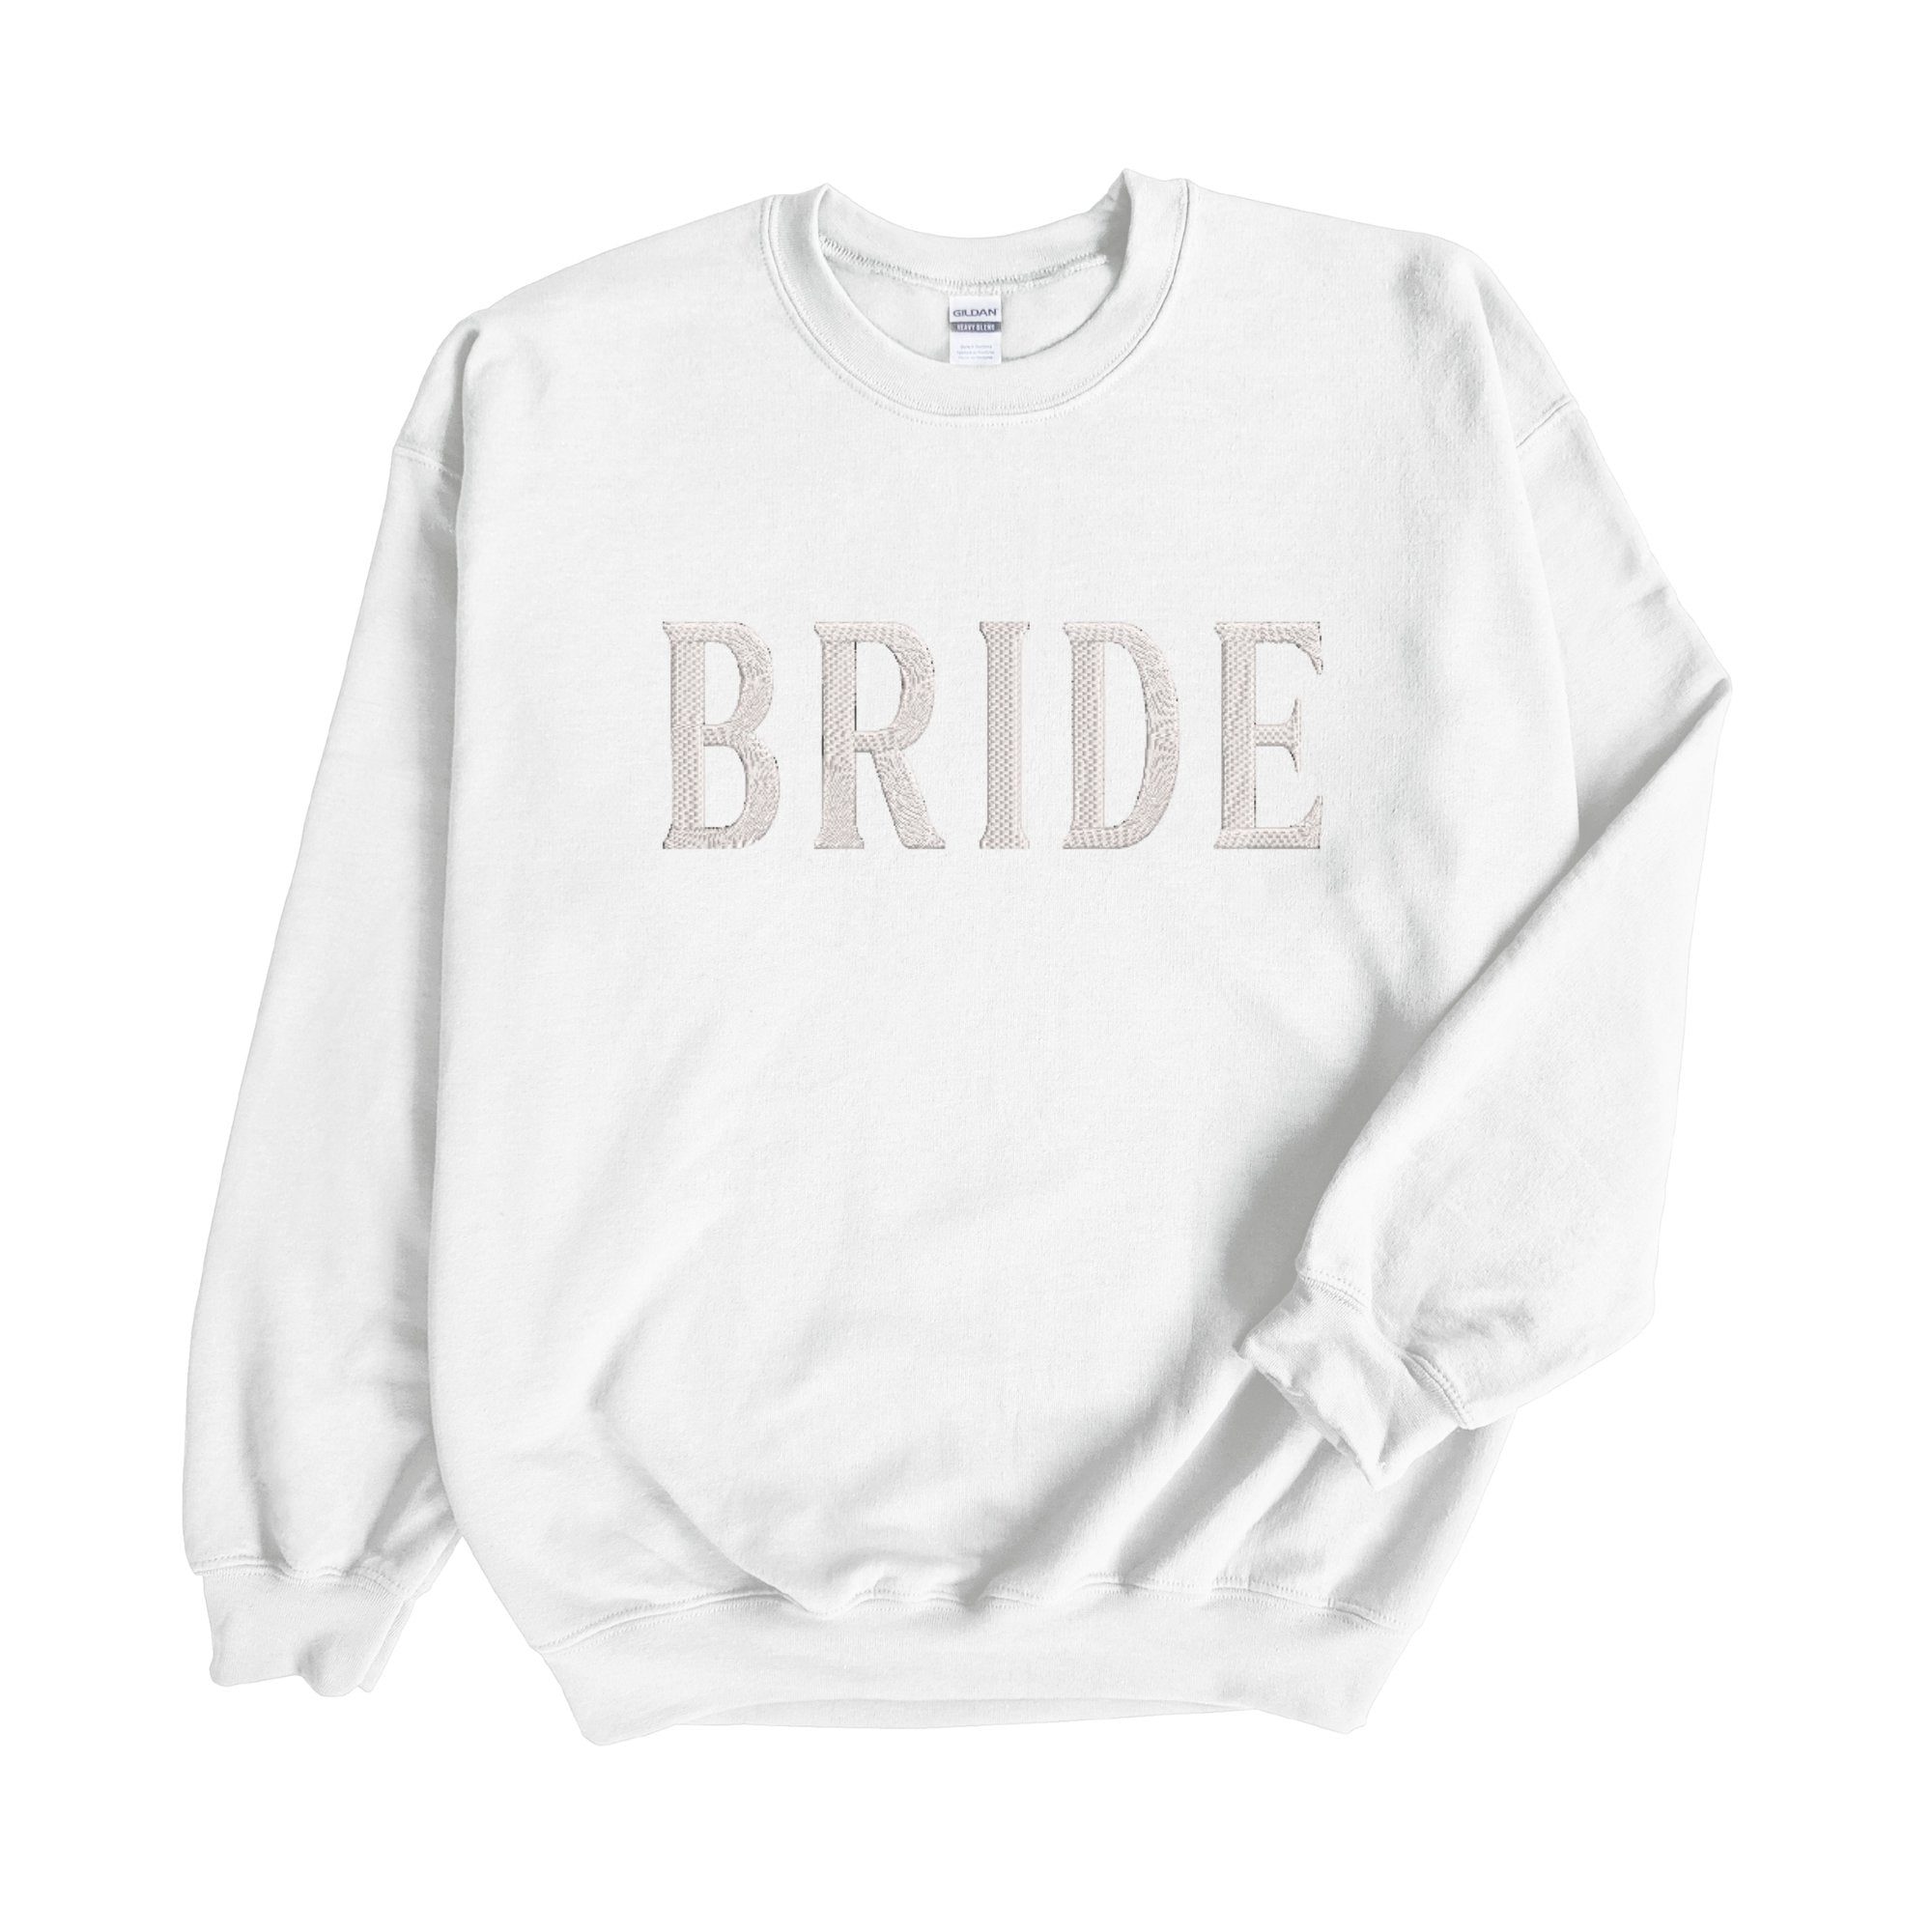 A white sweatshirt with "Bride" embroidered on the front